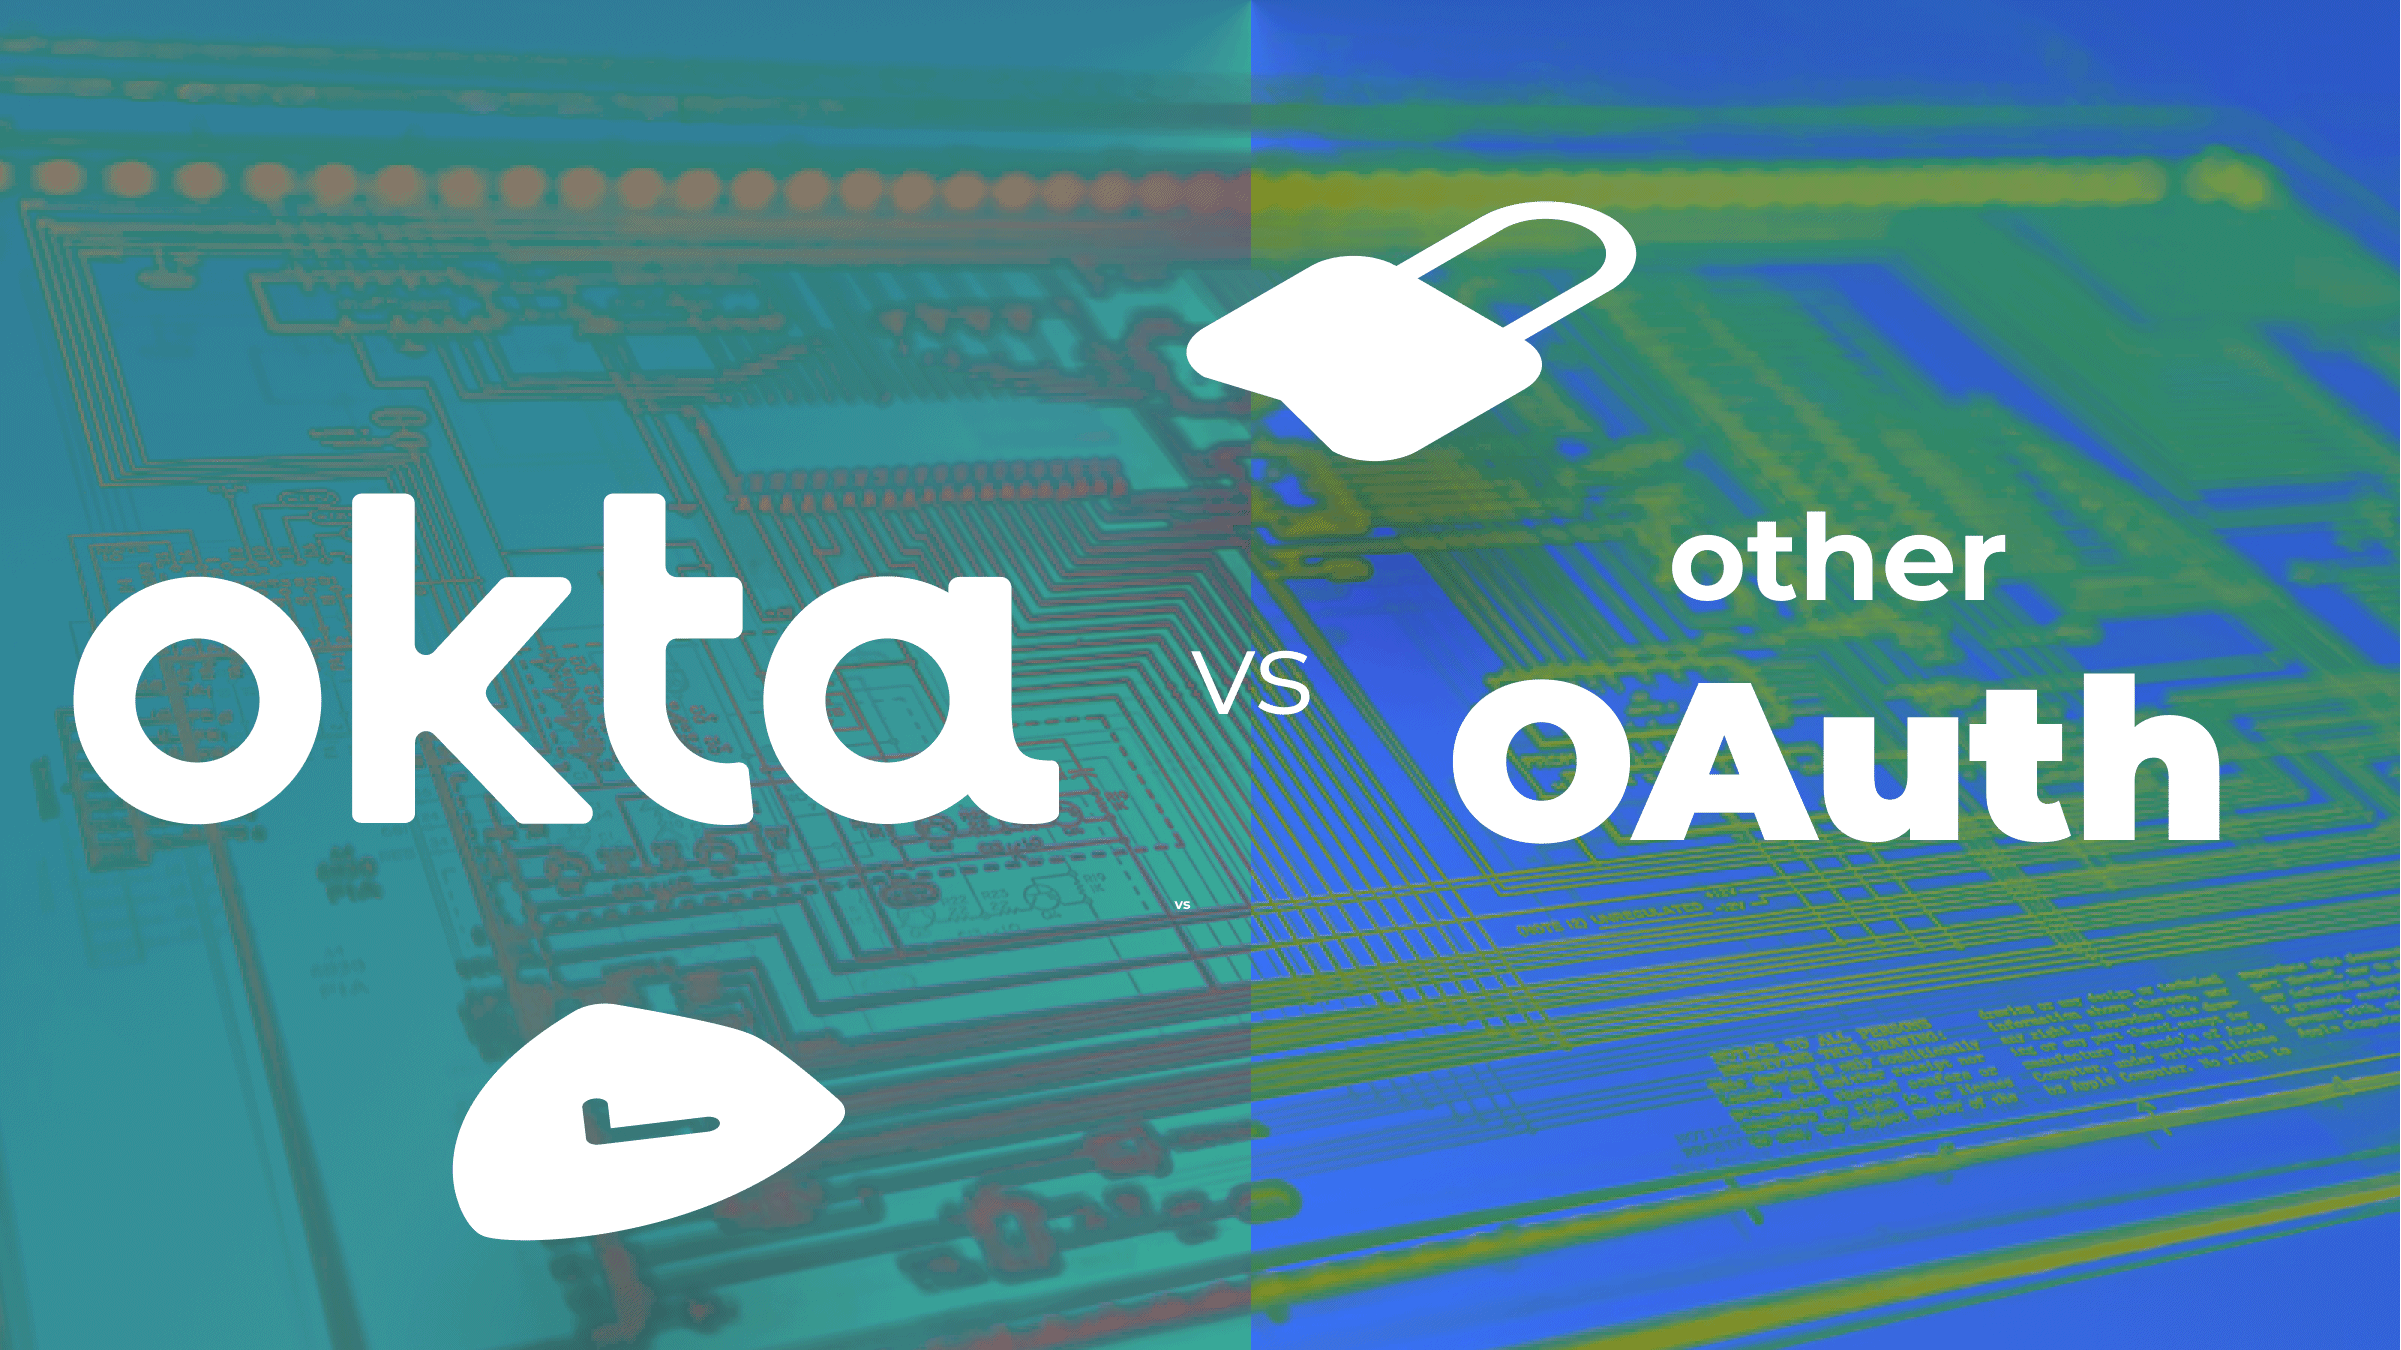 Okta vs. Other Authentication/Authorization managers